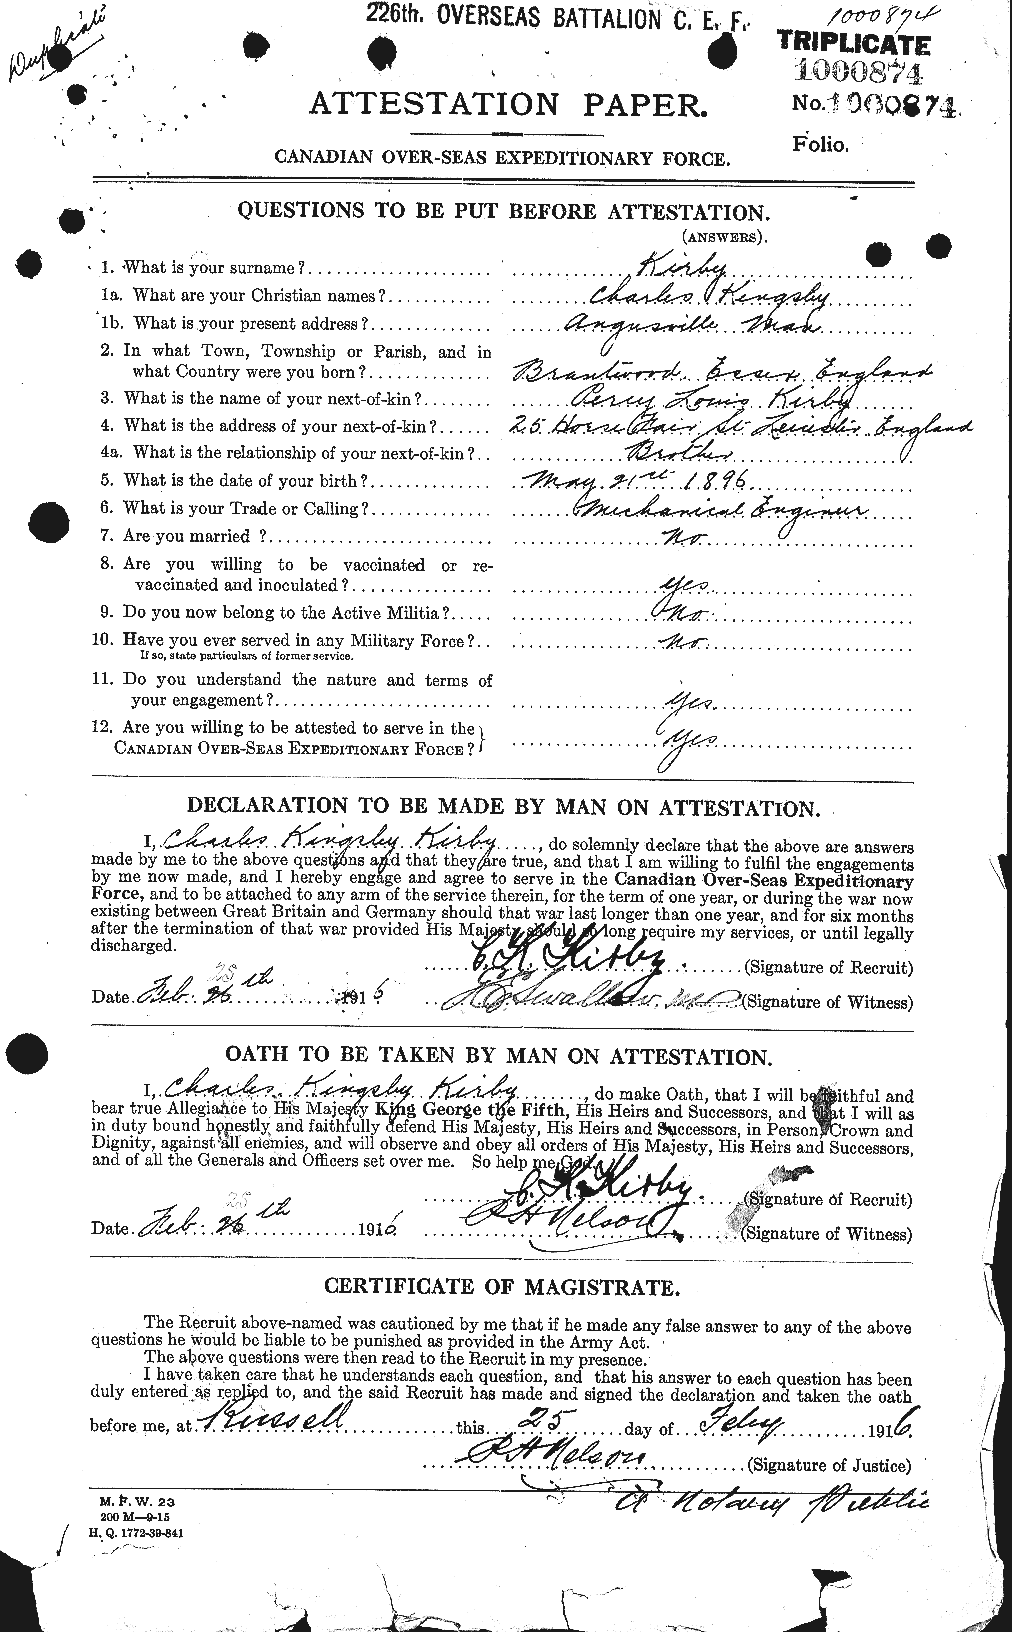 Personnel Records of the First World War - CEF 437167a